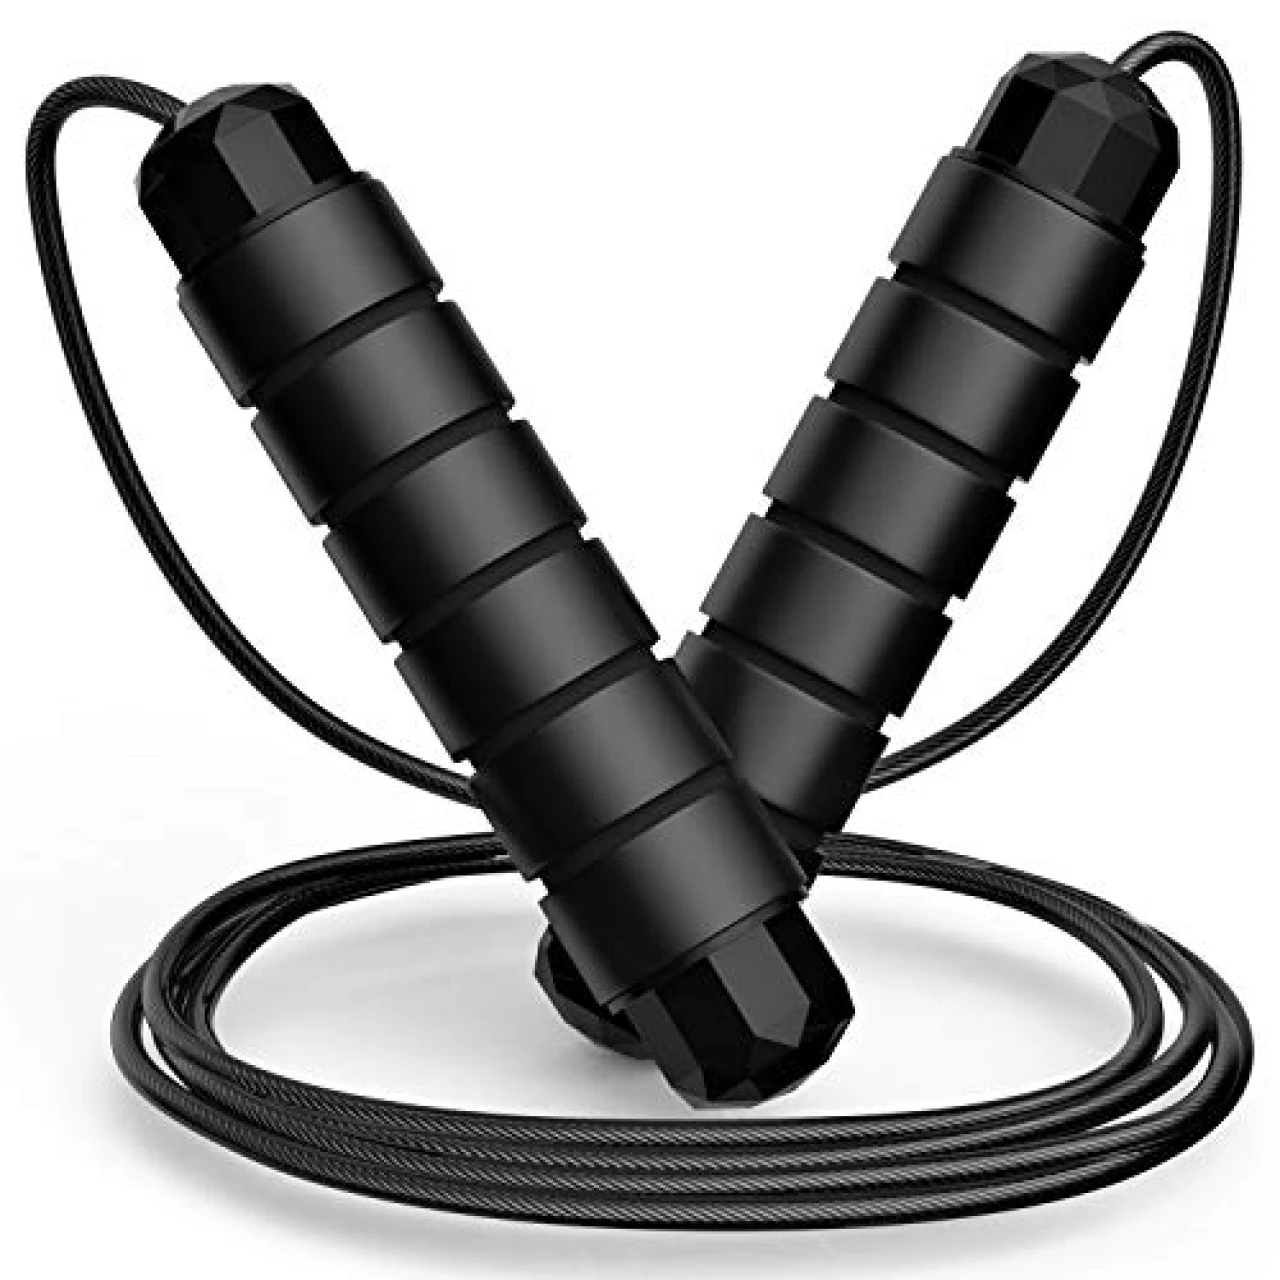 Jump Rope, Tangle-Free Rapid Speed Jumping Cable with Ball Bearings for Women, Men and Kids, Adjustable Foam Handles Steel Ropes for Fitness,Black,1 Pack